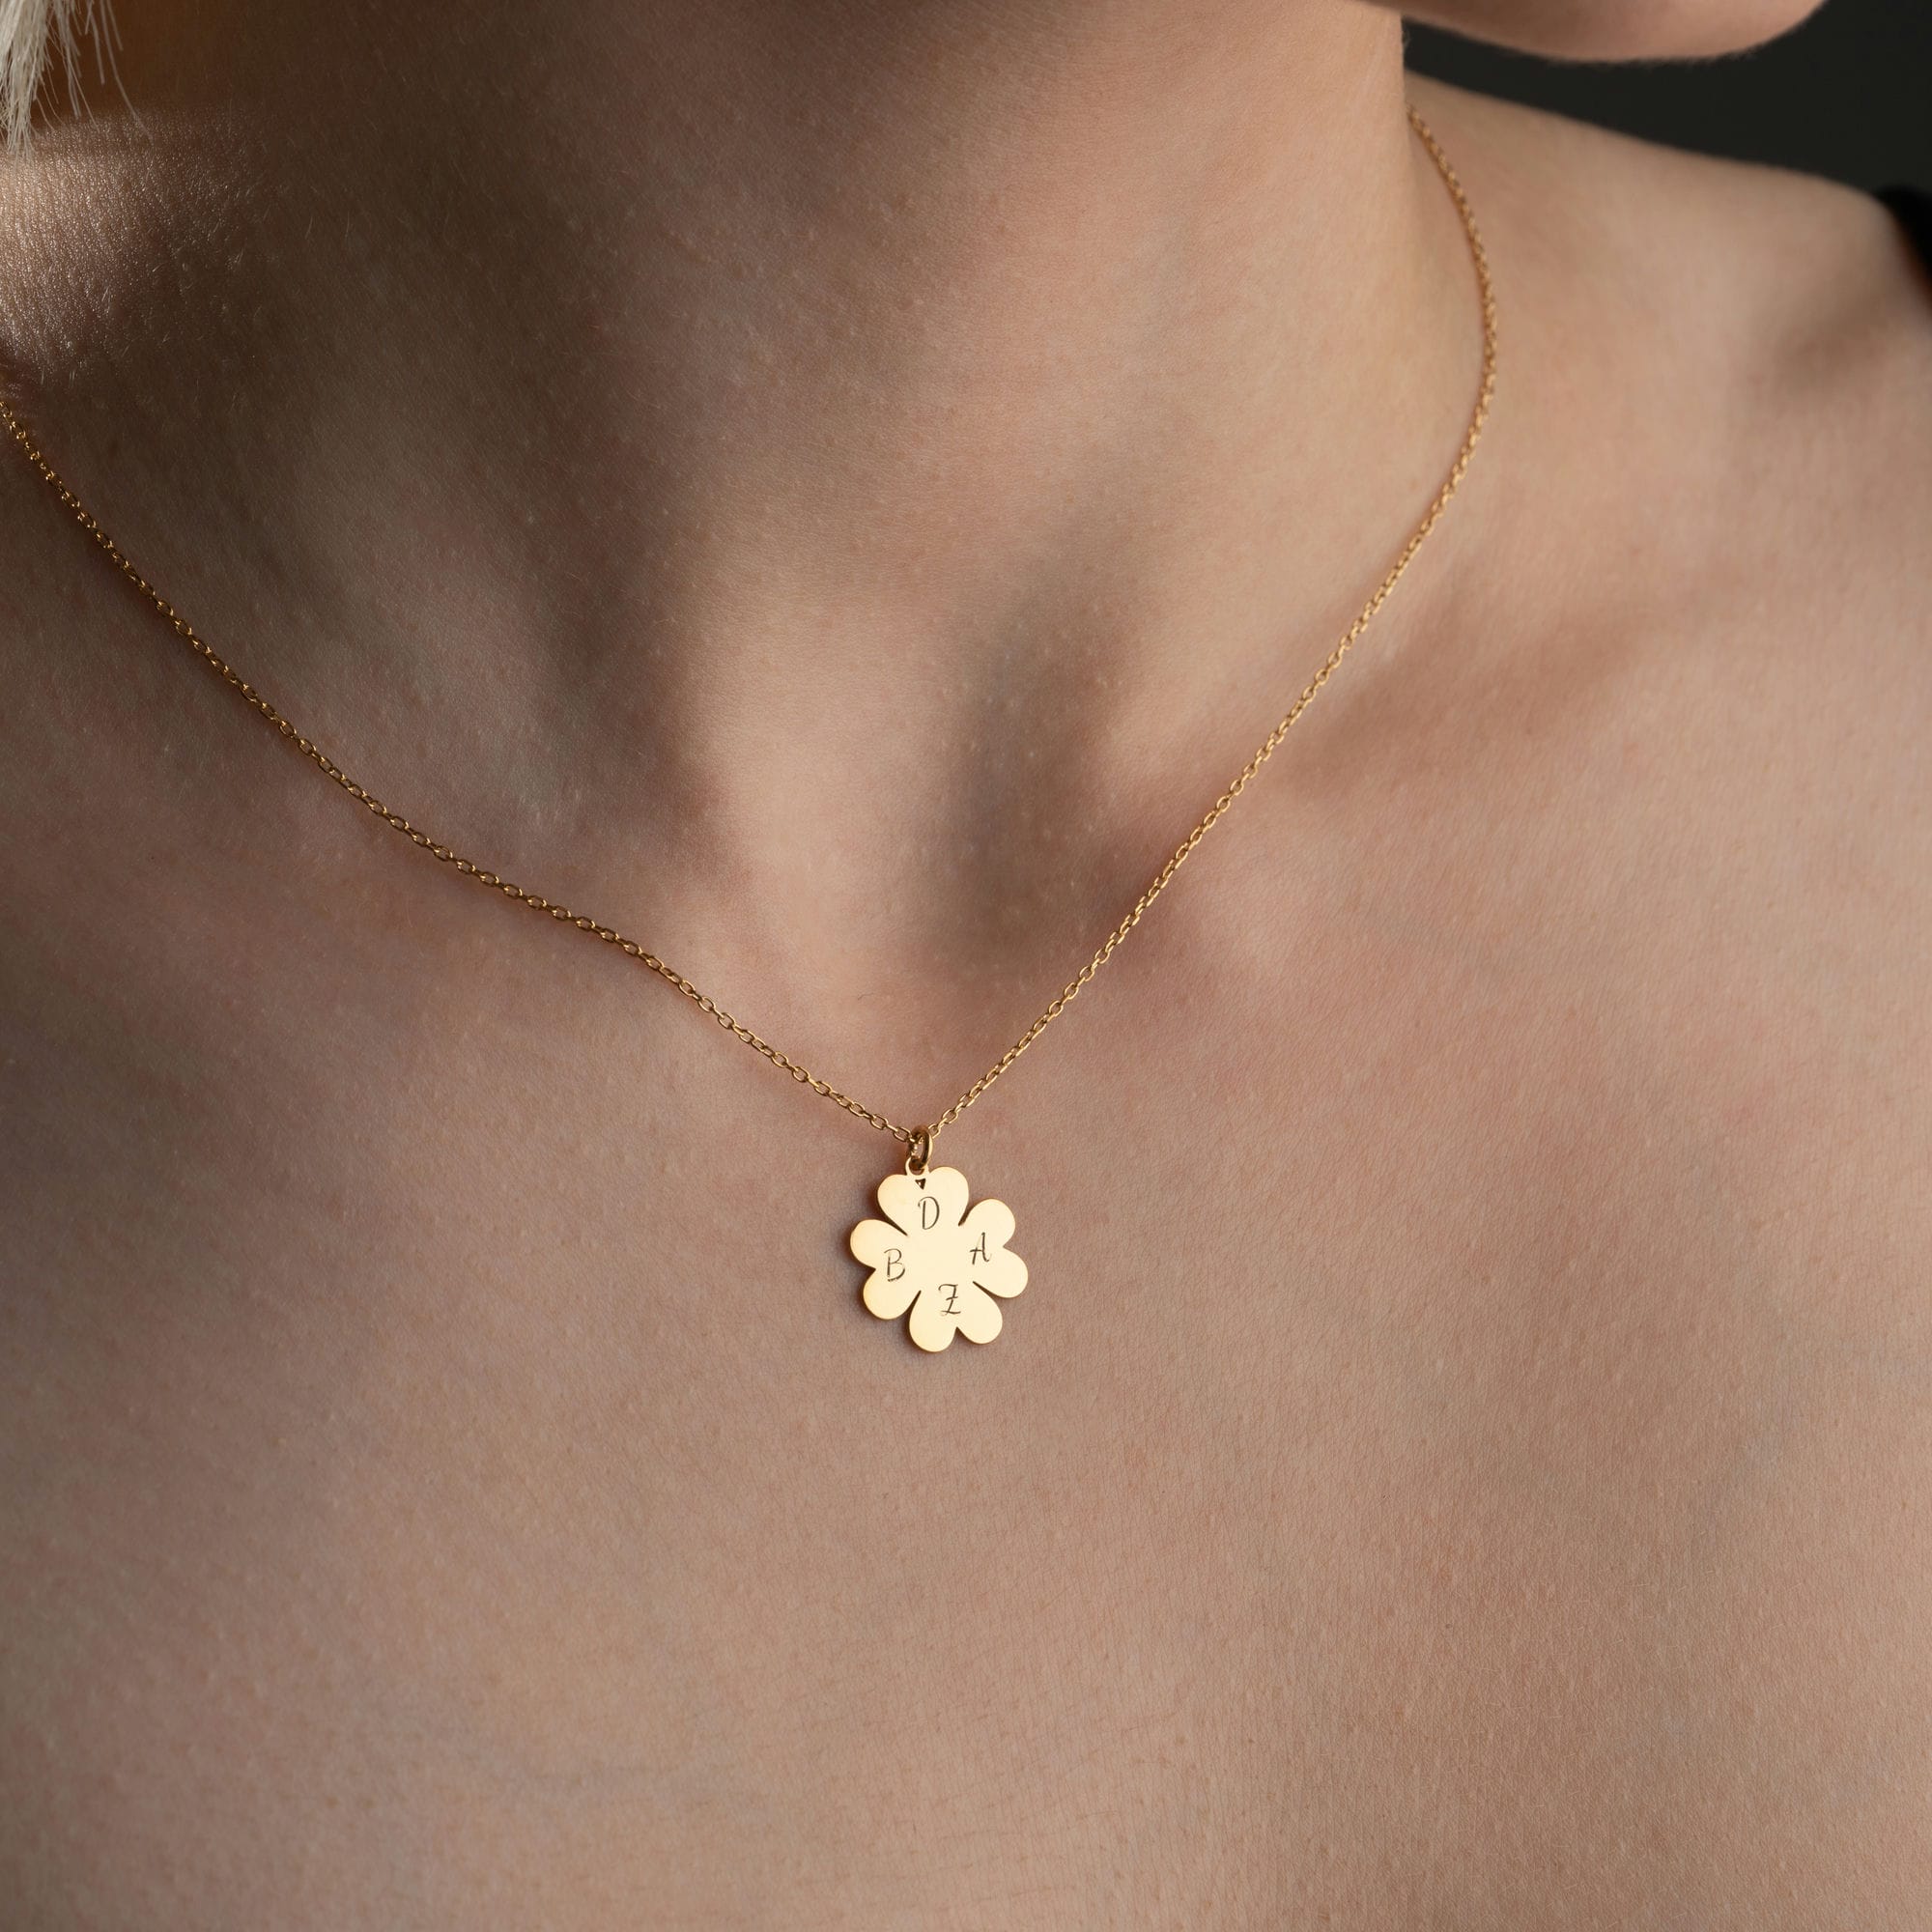 Four Leaf Clover Necklace With Initials